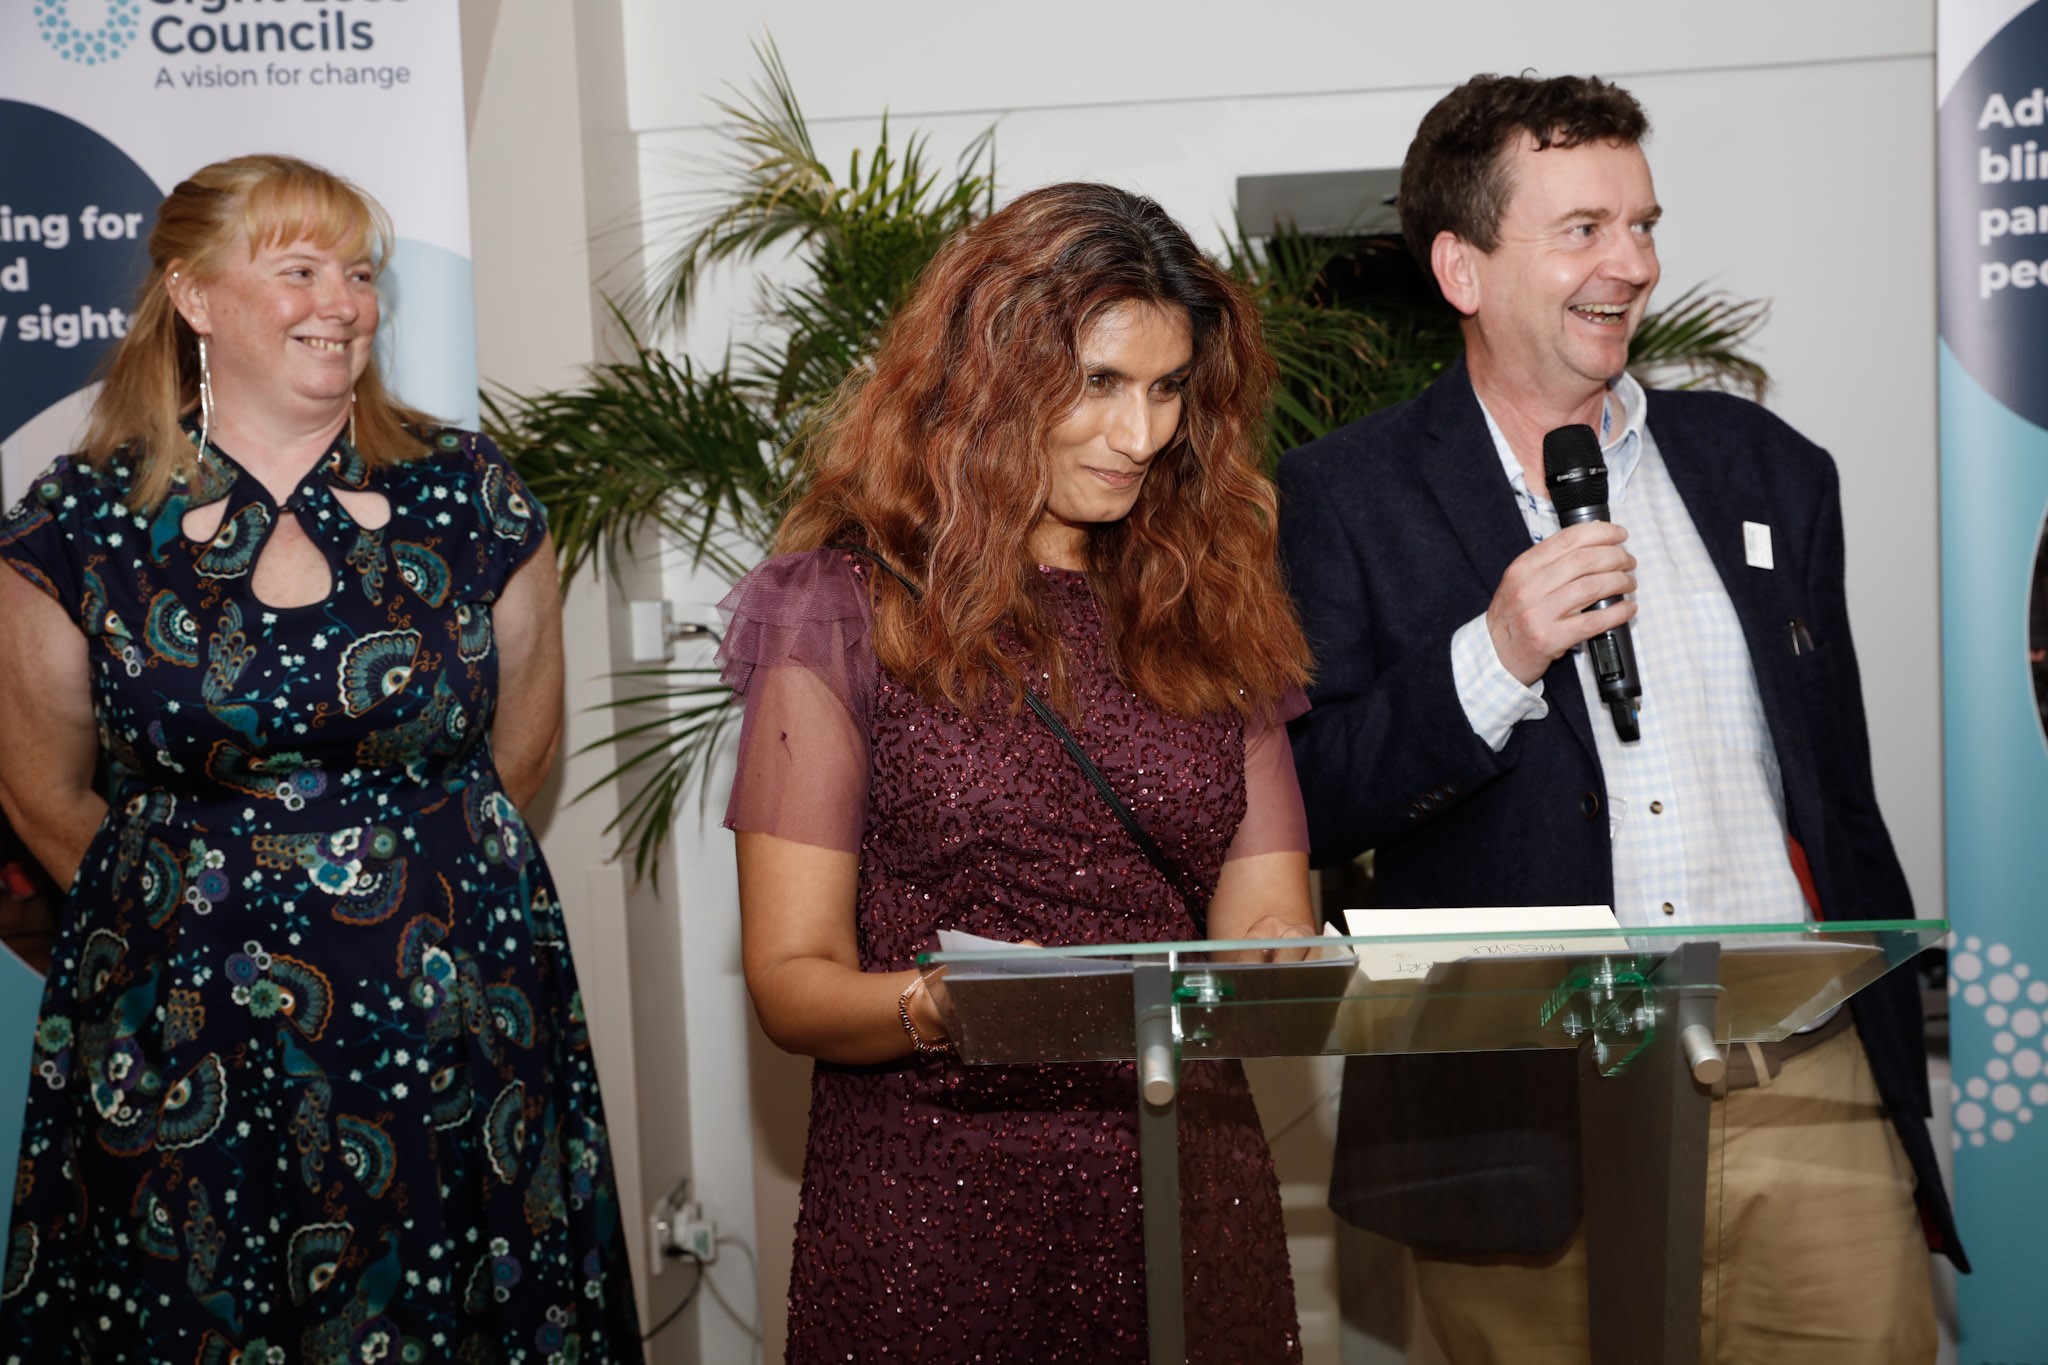 From left to right: Tricia Sail, Anela Wood, West of England SLC member, and Charles Colquhoun, CEO of Thomas Pocklington Trust. Anela is standing at a glass plinth, accepting the award. Charles is holding a microphone.